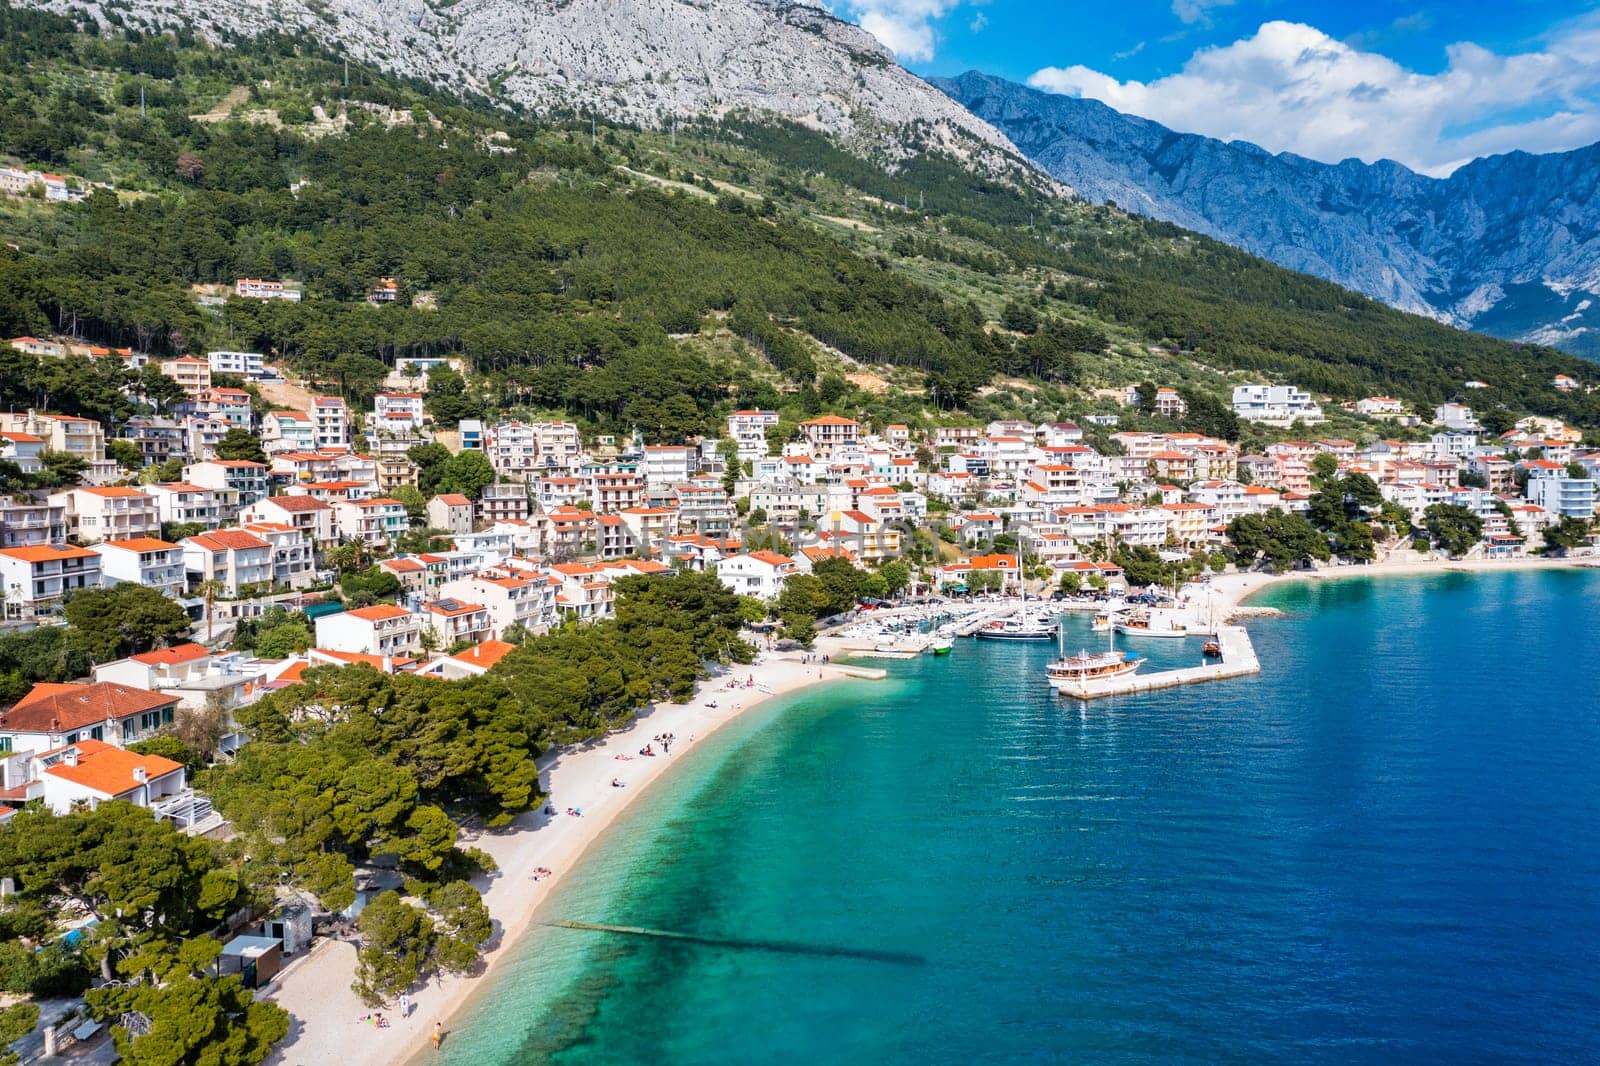 Beautiful Brela on Makarska riviera, Croatia. Adriatic Sea with amazing turquoise clean water and white sand. Aerial view of Brela town and waterfront on Makarska riviera, Dalmatia region of Croatia.